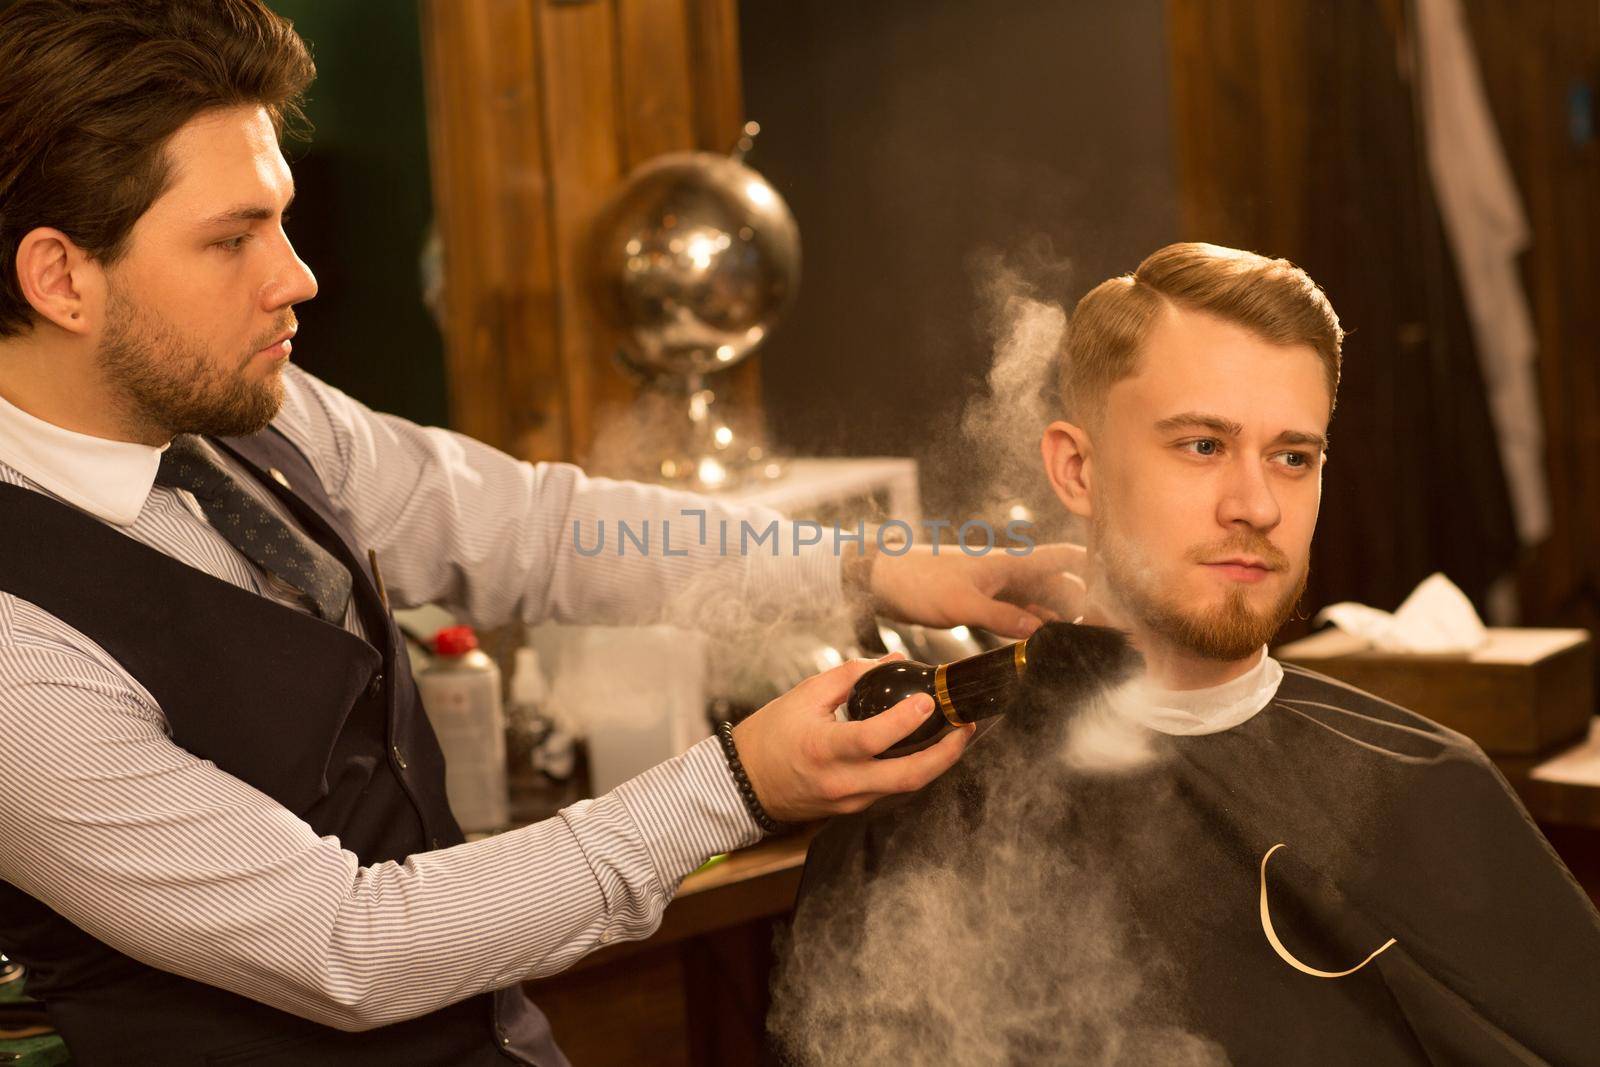 Handsome young man looking away sitting in the barber chair professional barber using talcum powder after shaving his client work employee service consumerism occupation job lifestyle hipster skincare